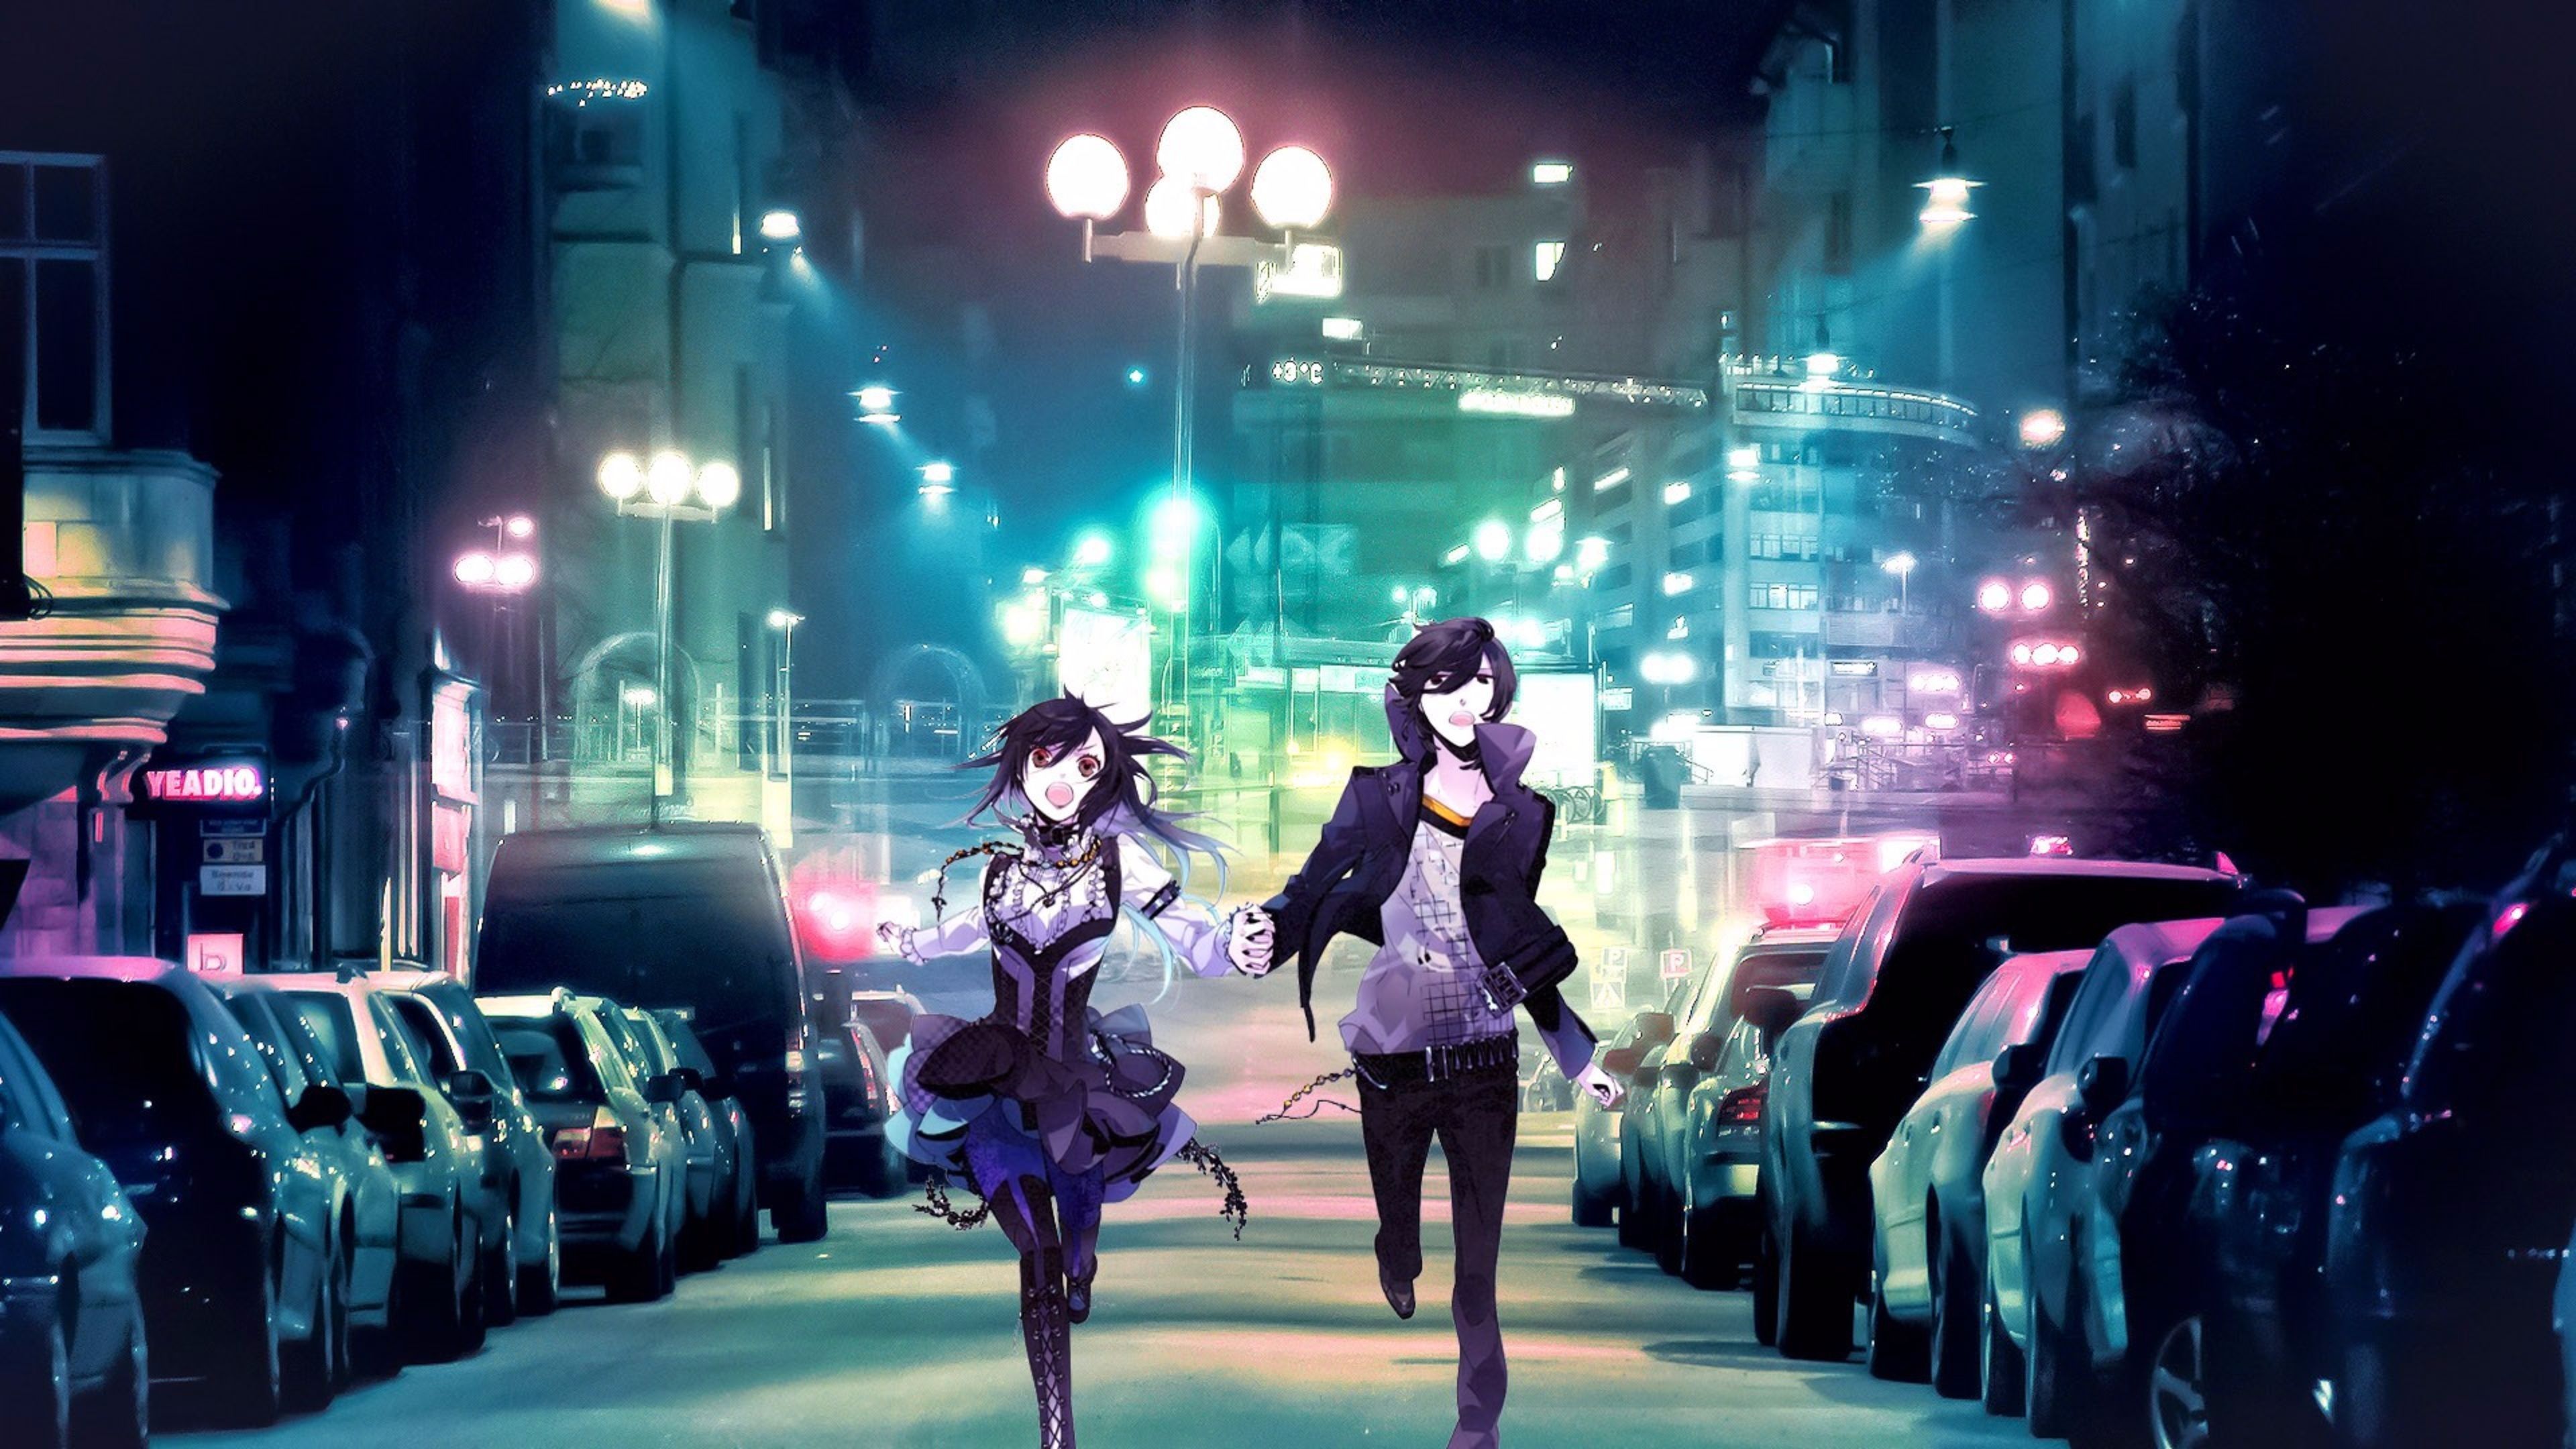 Aesthetic Background Anime HD Free Download